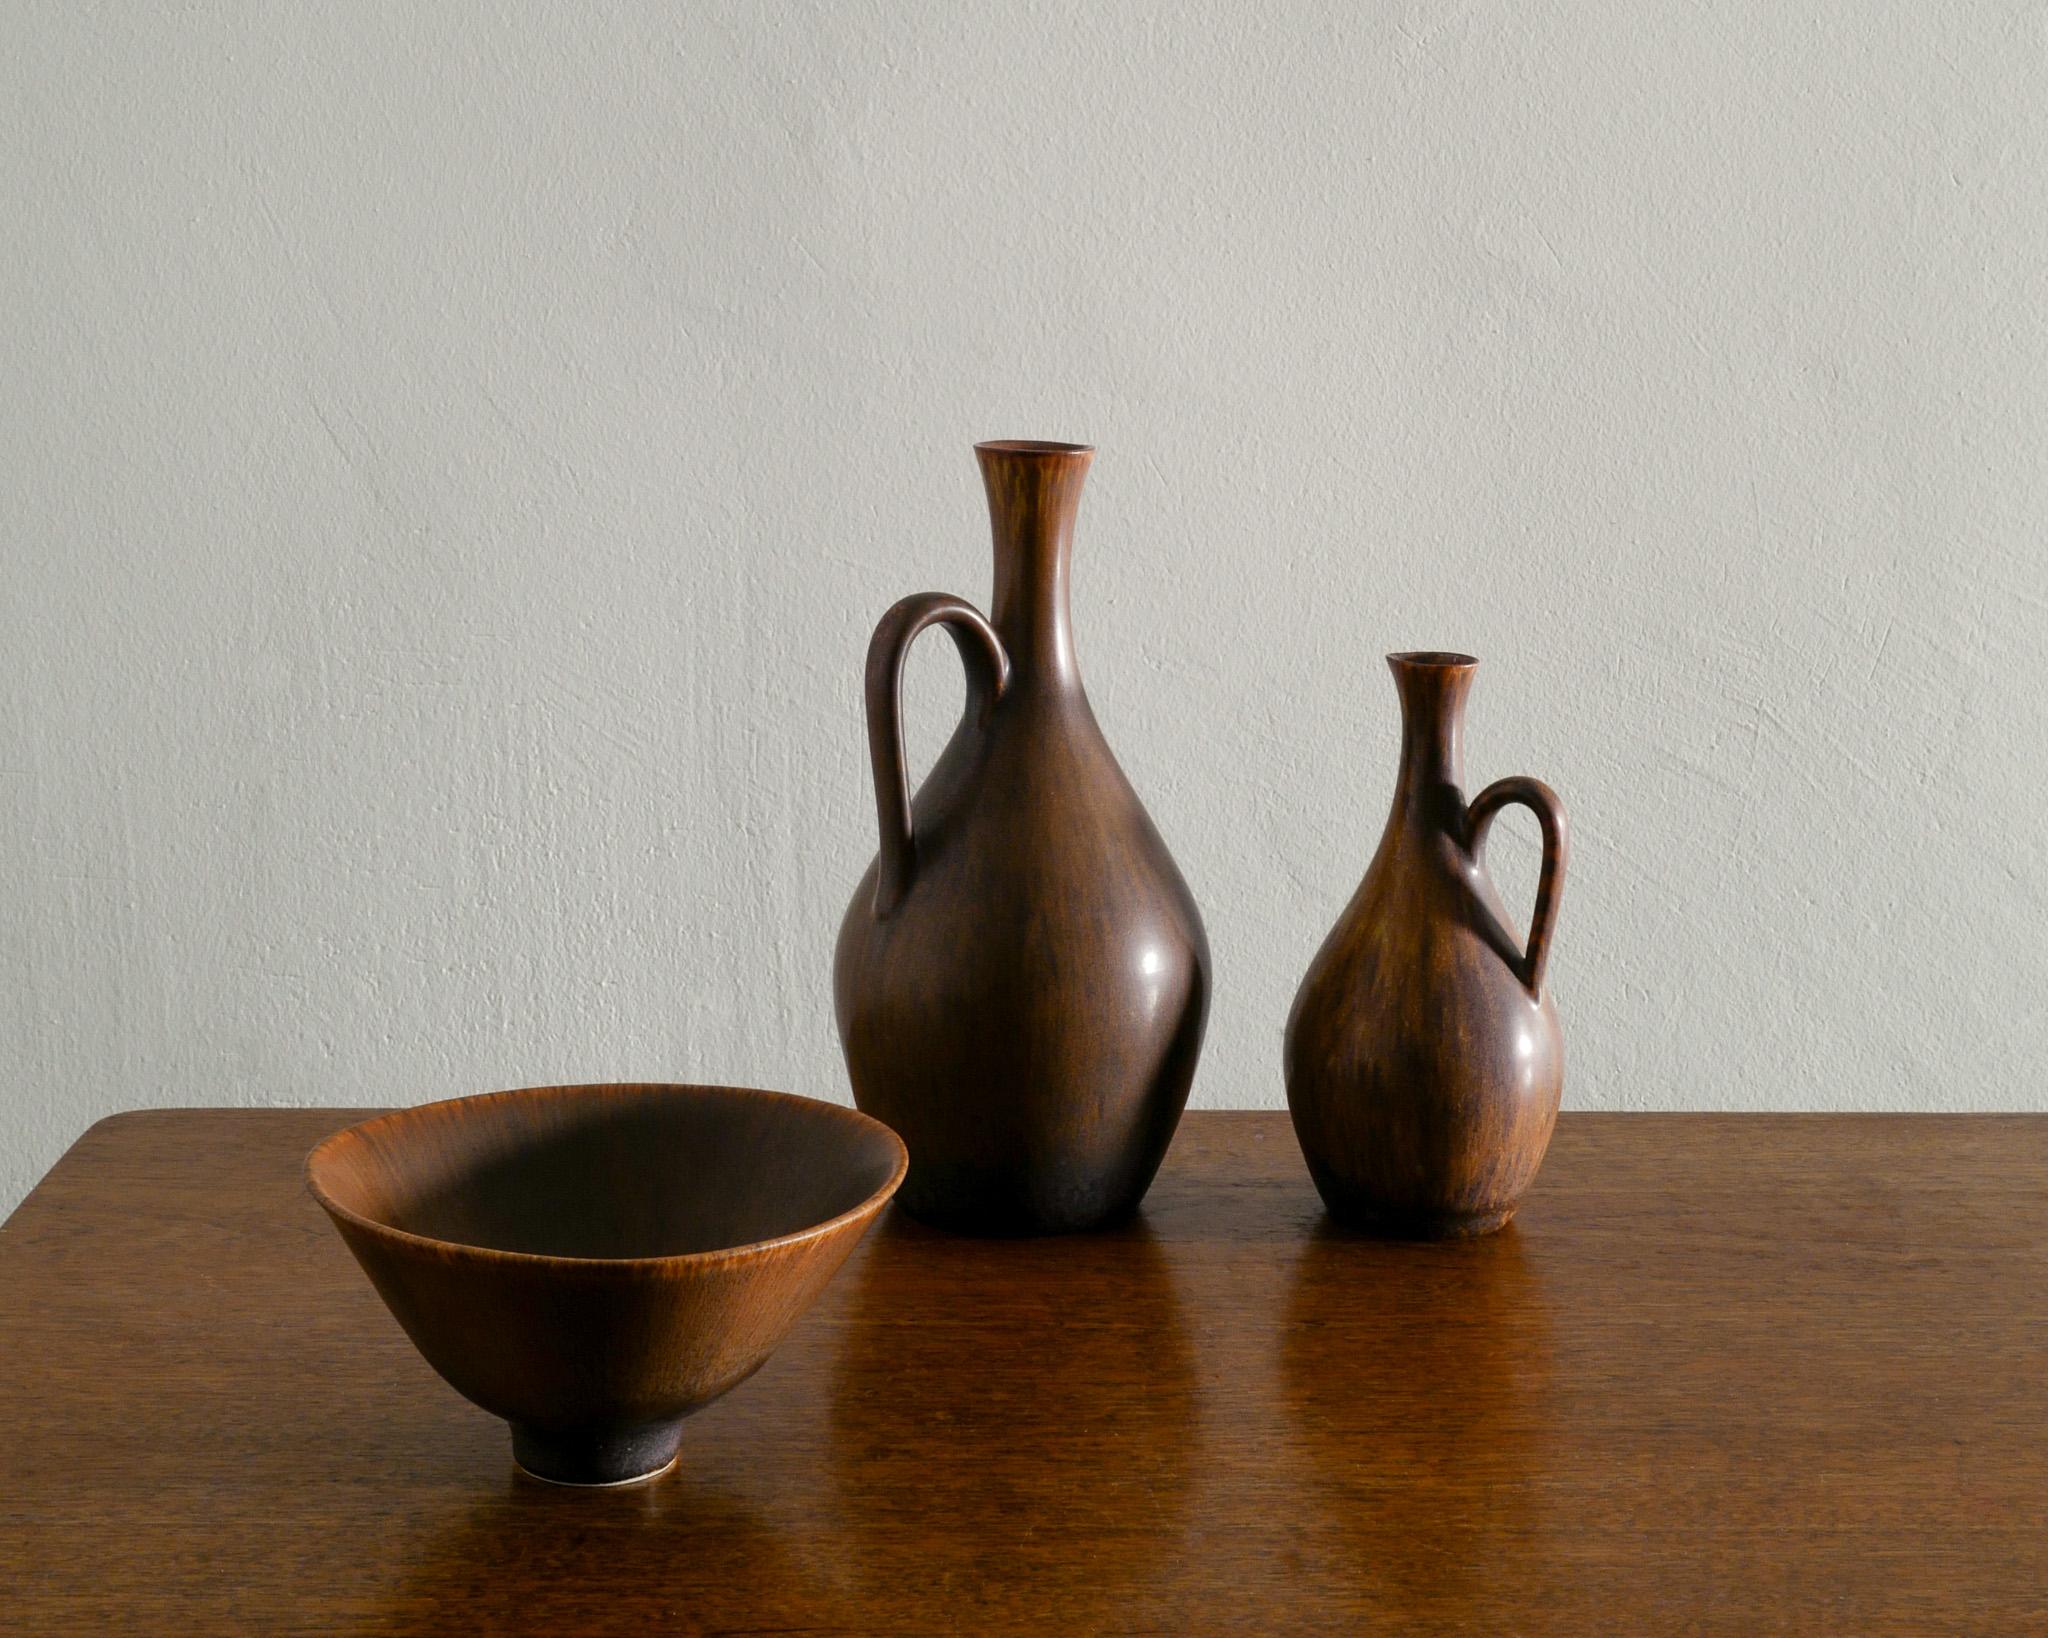 Rare set of brown glazed ceramics by Carl-Harry Stålhane produced by Rörstrand, Sweden 1950s. In good original condition. All signed.

Dimensions: Large Pitcher: H: 23 x 11 cm / 9